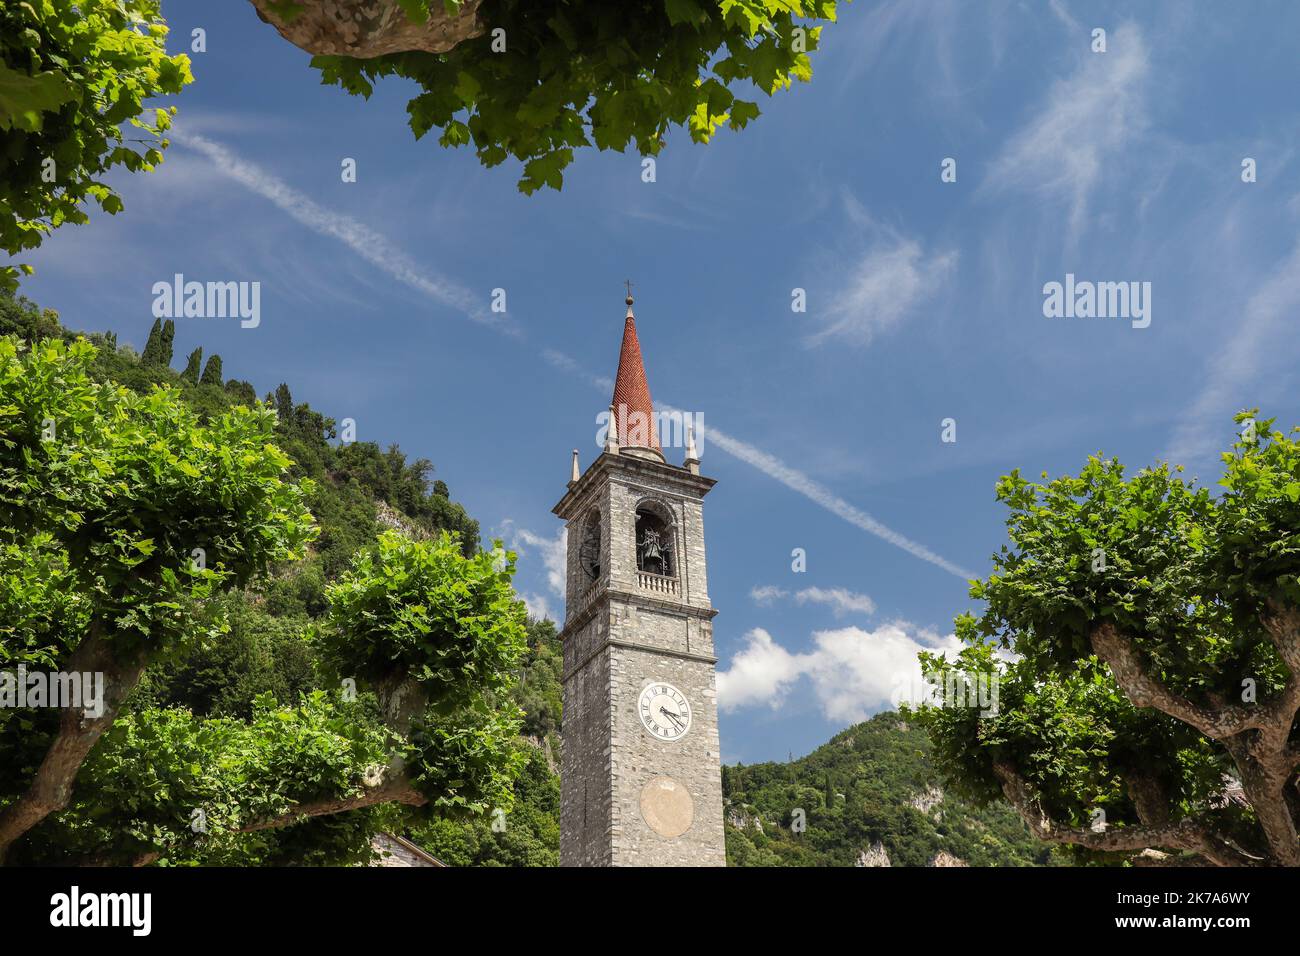 Stone Bell Tower in Varenna. Beautiful Historic Architecture with Green Trees in Province of Lecco during Sunny Day with Blue Sky. Stock Photo